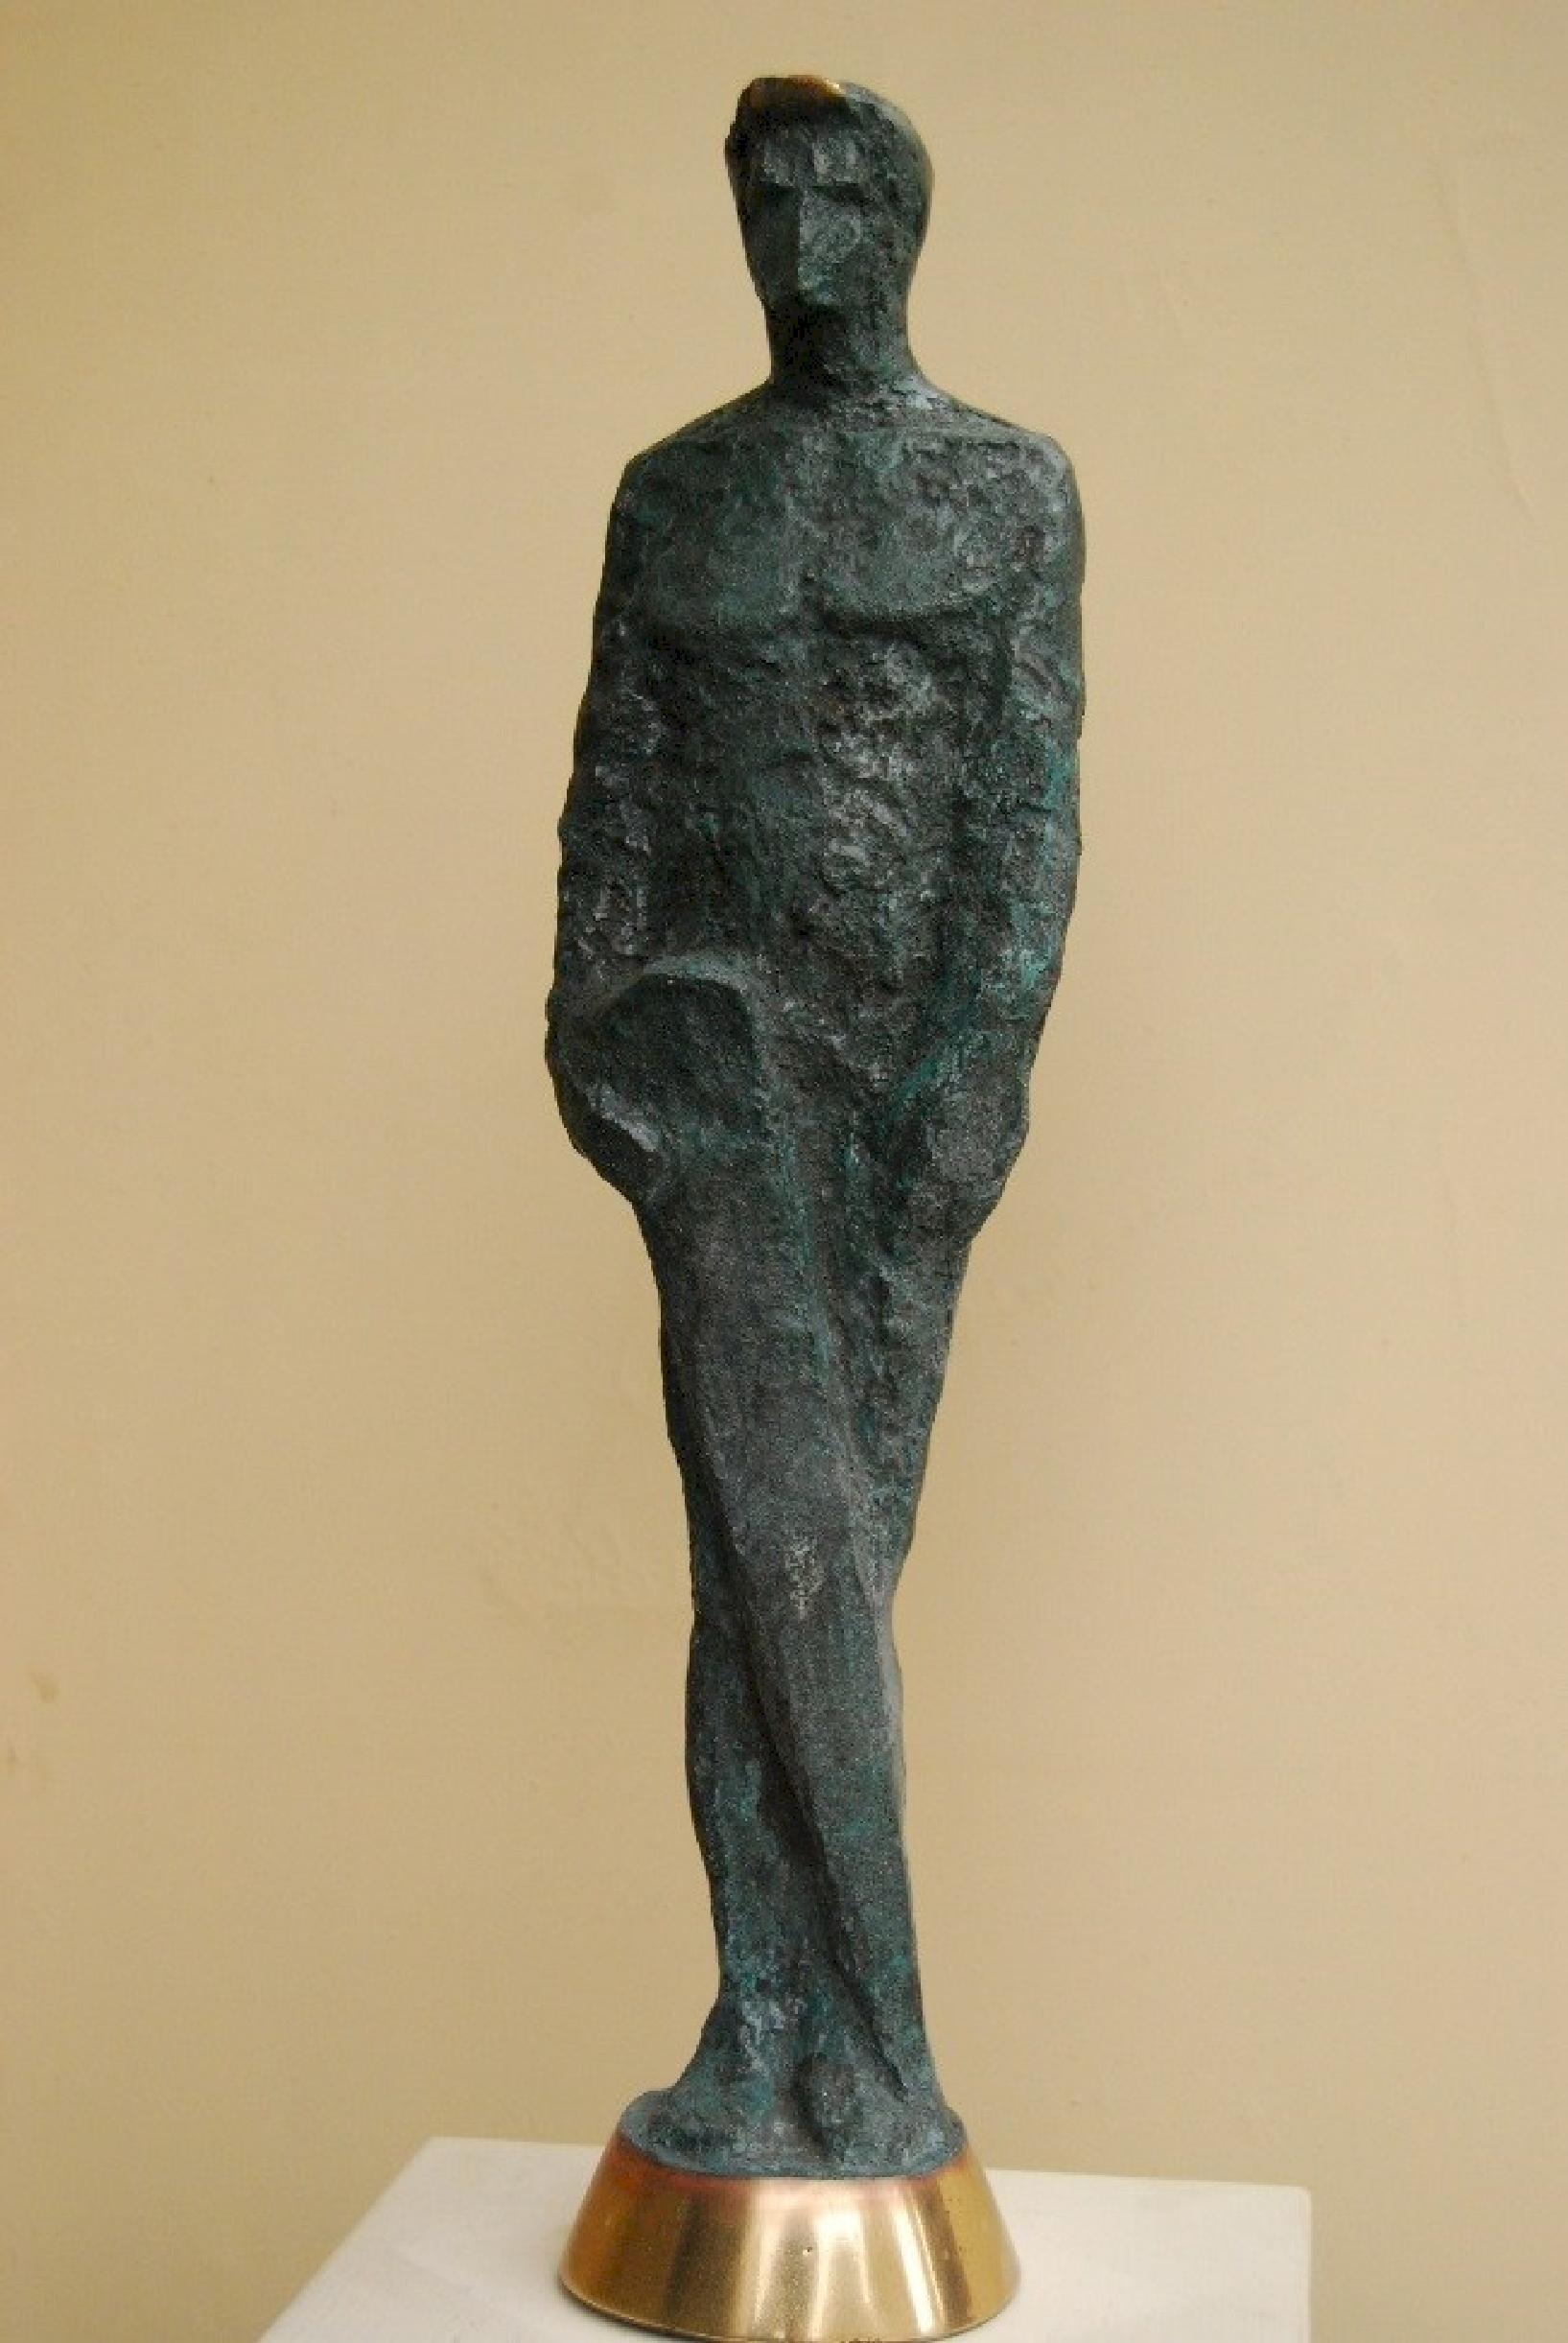 "Sportsman" Bronze Sculpture 18.5" x 5.5" inch by Sarkis Tossonian

Sarkis Tossoonian was born in Alexandria in 1953. He graduated from the Faculty of Fine Arts/Sculpture in 1979. He started exhibiting in individual and group exhibitions in